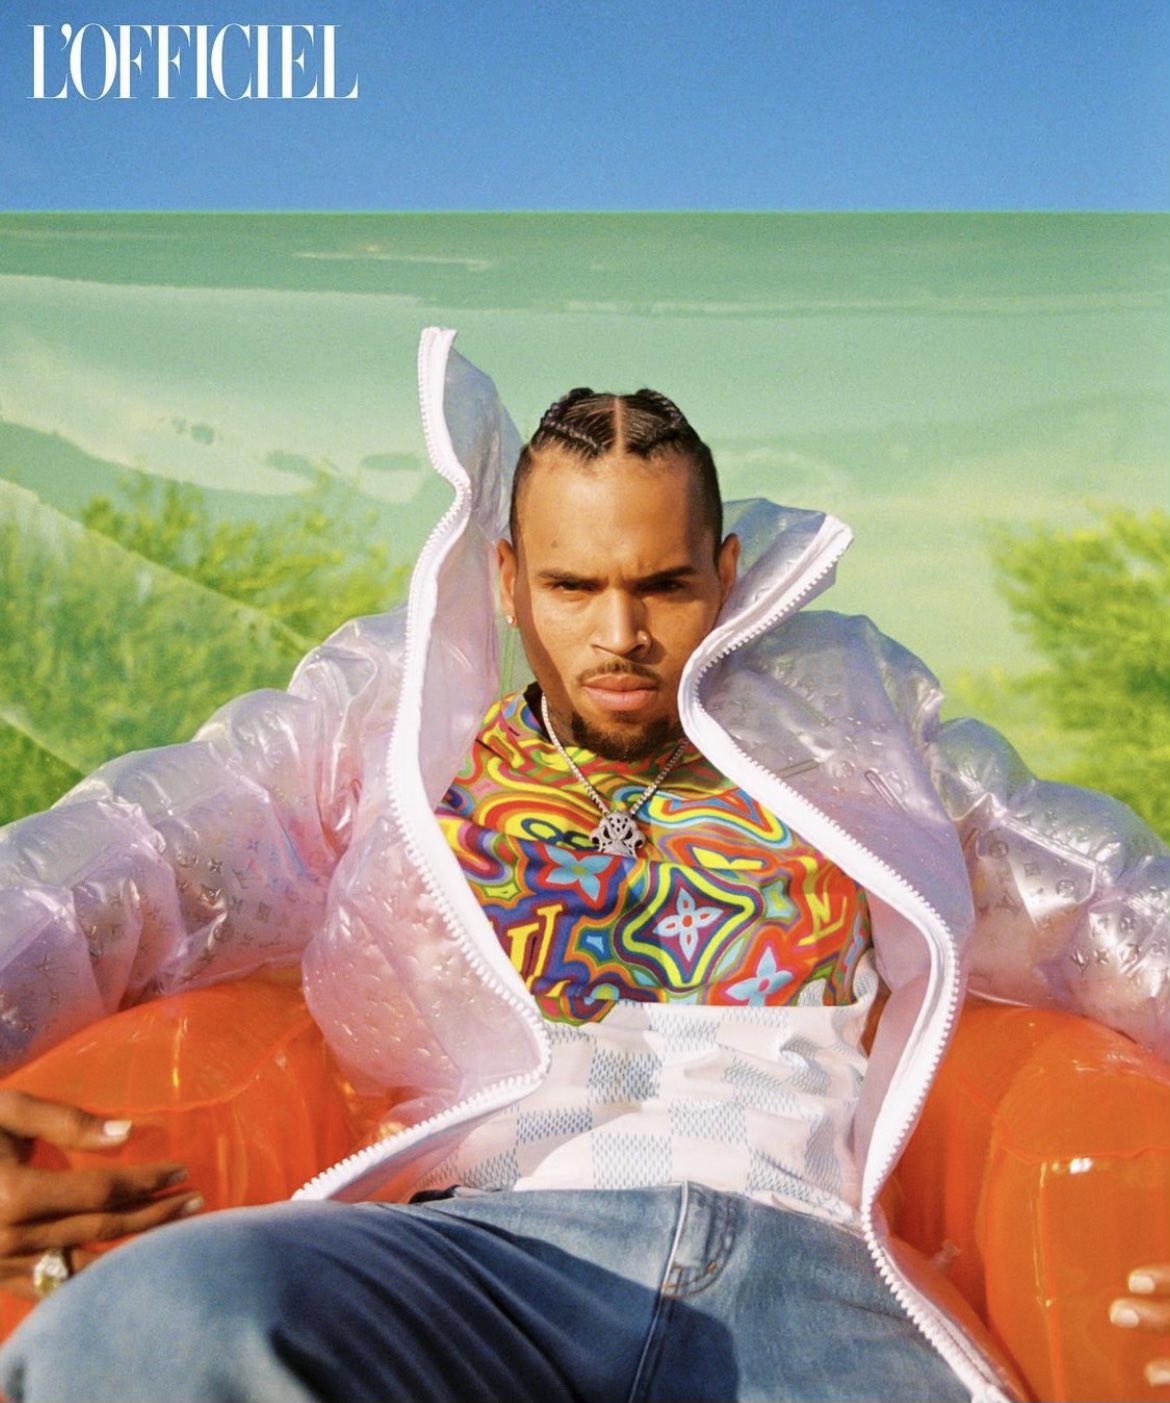 Outlander Magazine On Twitter Chris Brown For L Officiel India Wearing Louis Vuitton Https T Co Xqokwec8wg Twitter